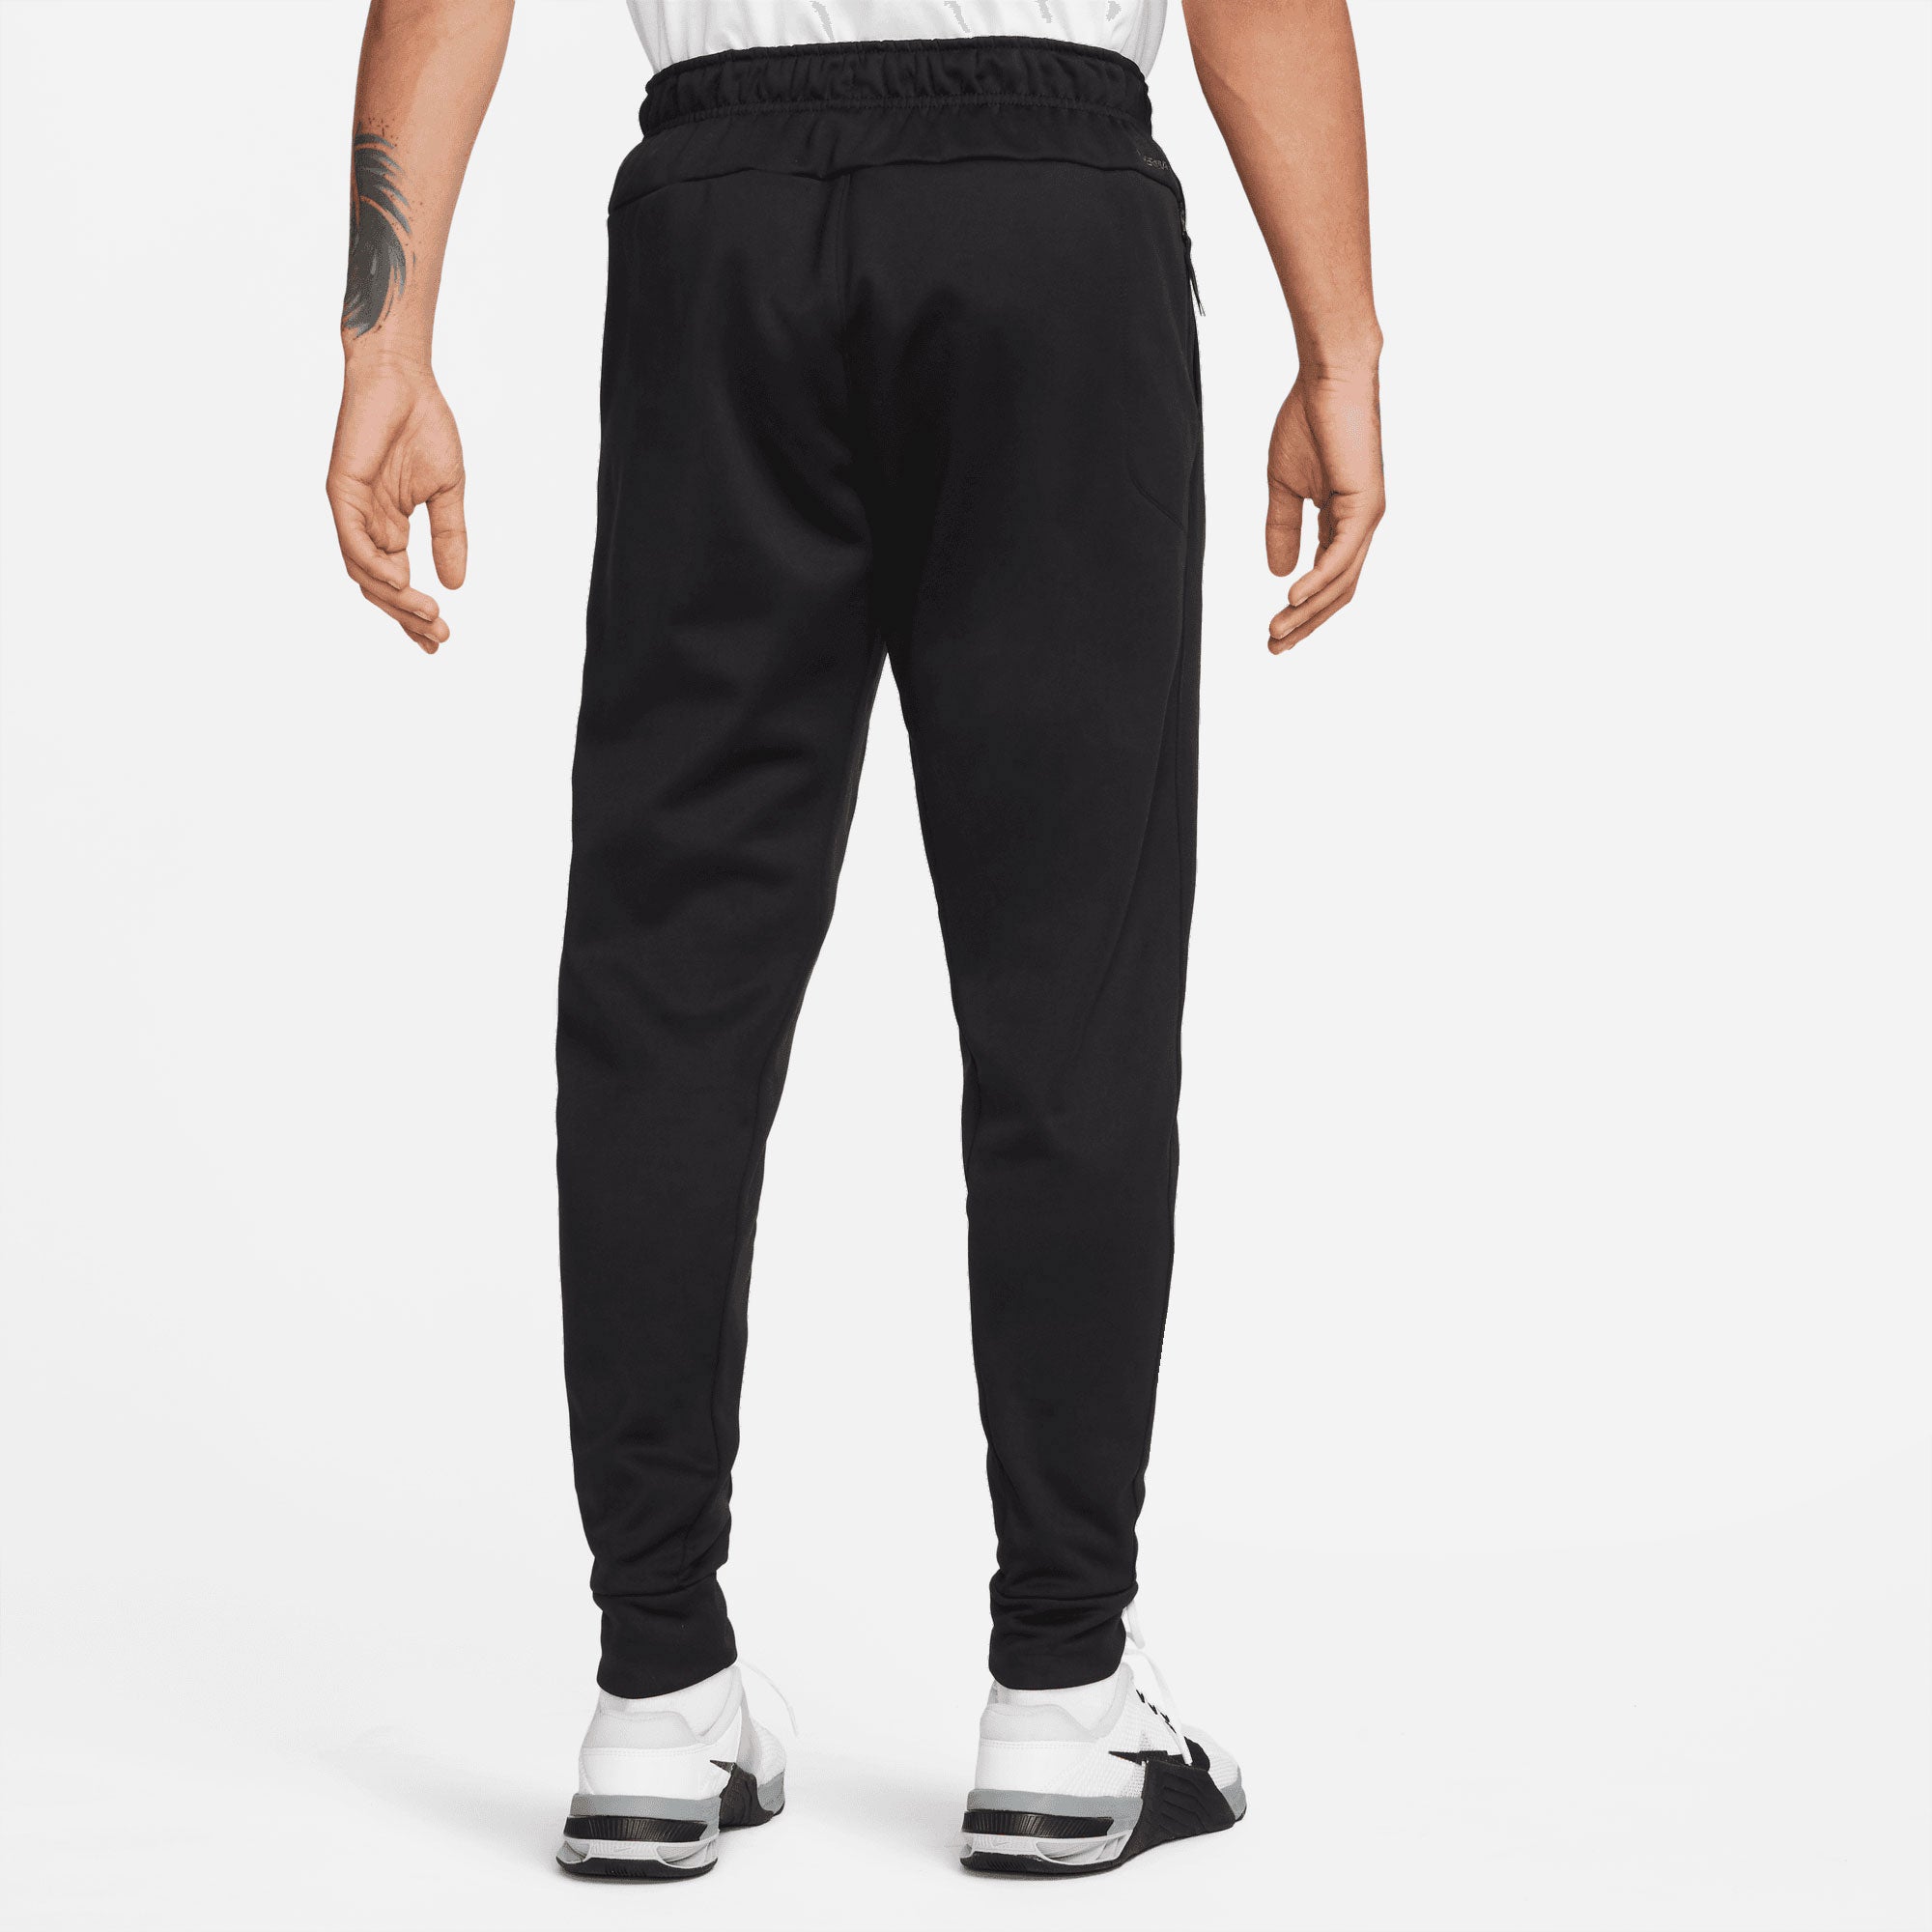 Nike Thema-FIT Men's Tapered Pants Black (2)